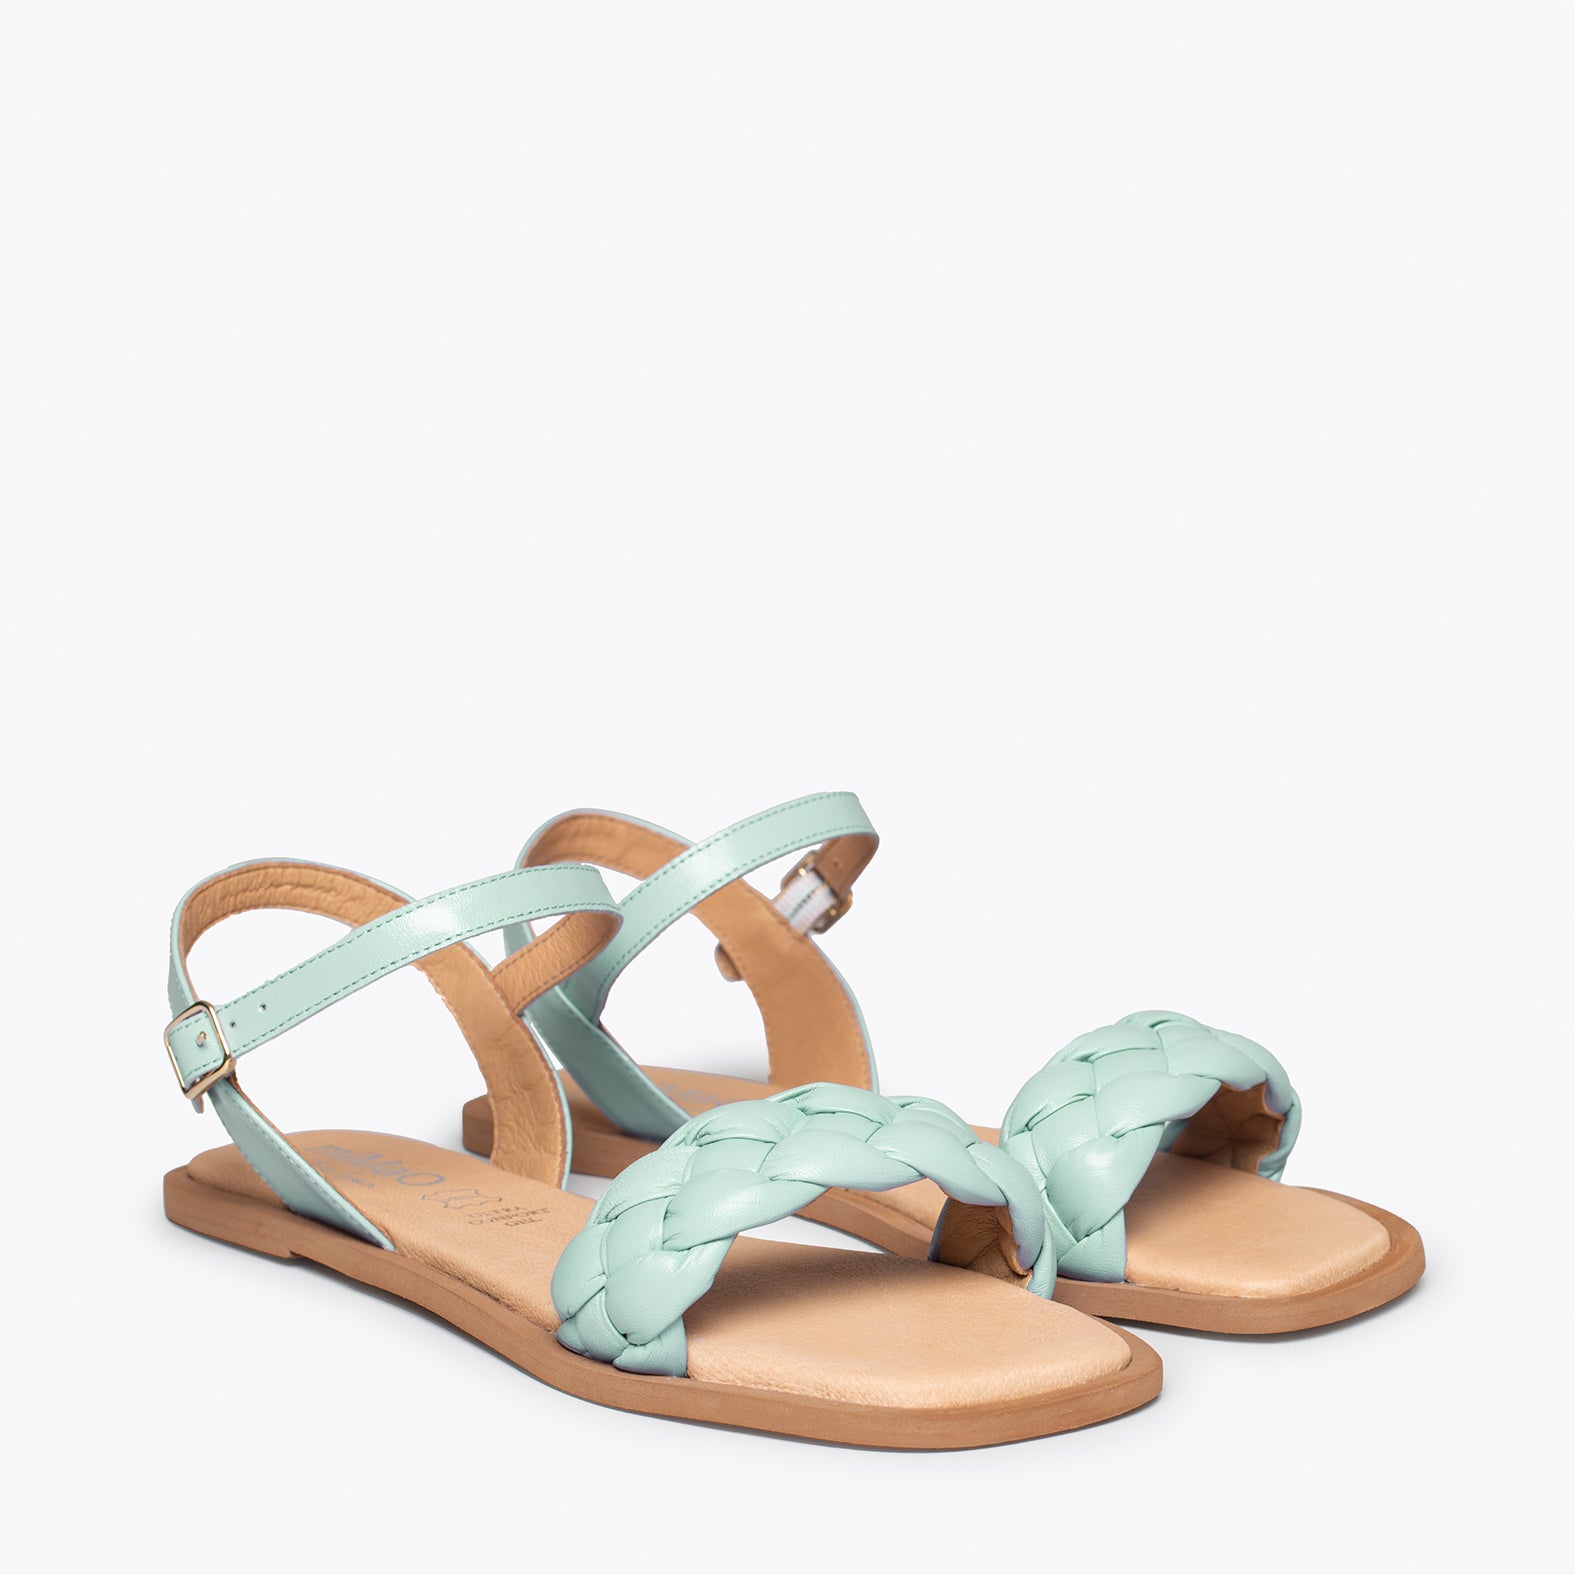 MARBELLA – GREEN flat sandals with braided strap